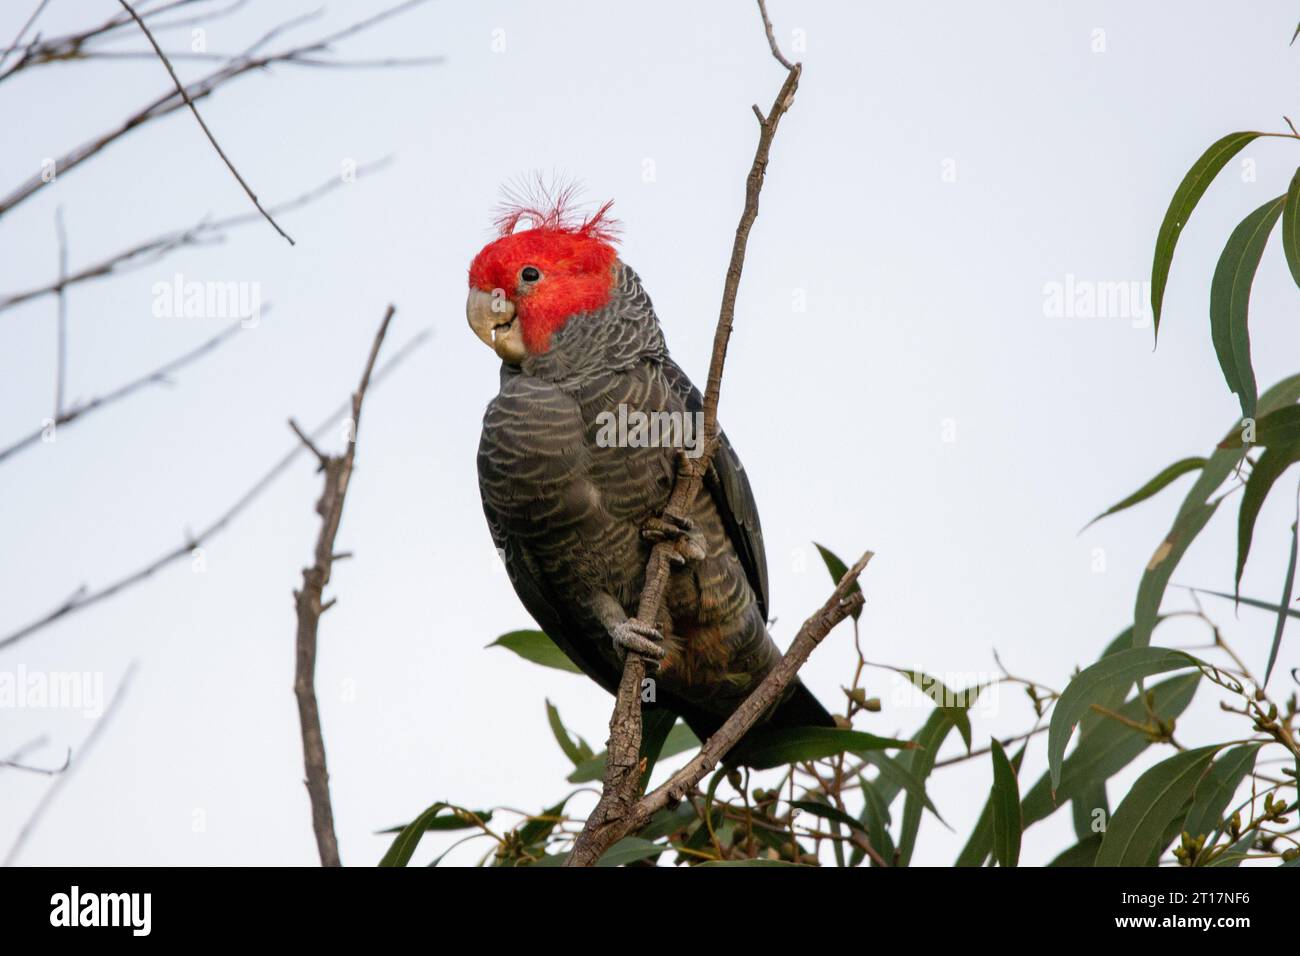 A male gang gang cockatoo (Callocephalon fimbriatum) with a beautiful red crest, perched in a tree Stock Photo